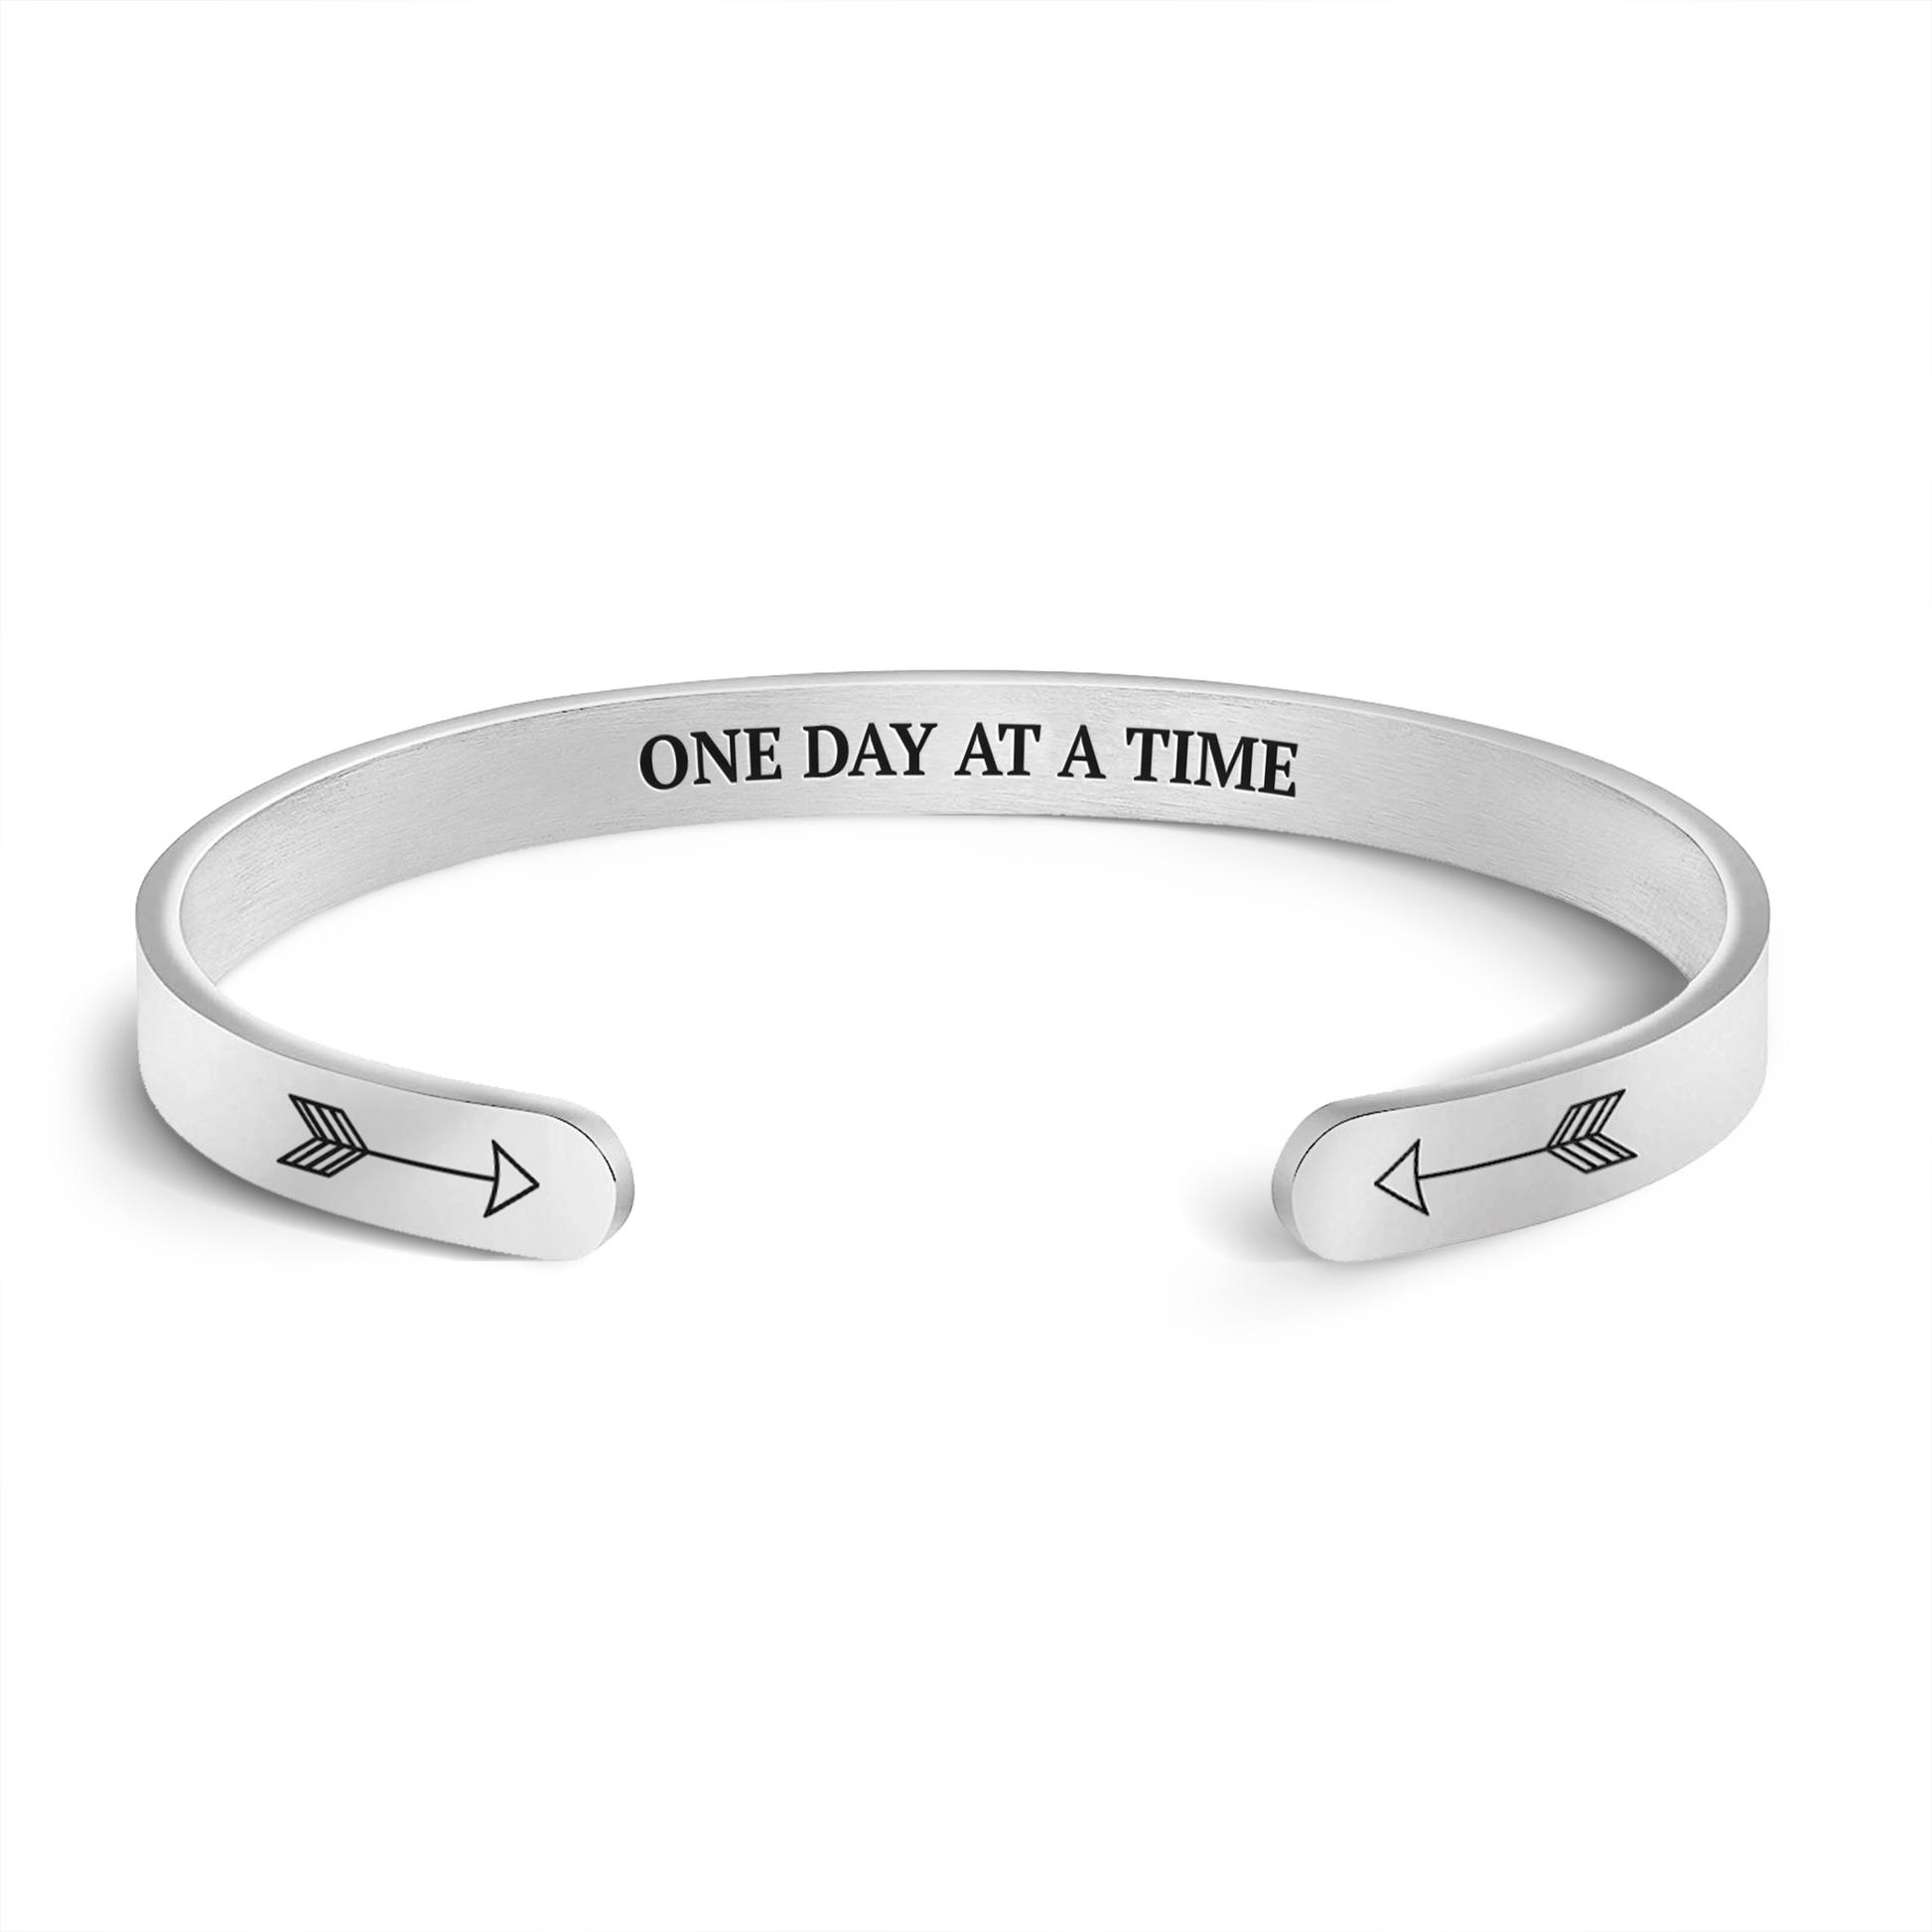 One day at a time bracelet with silver plating